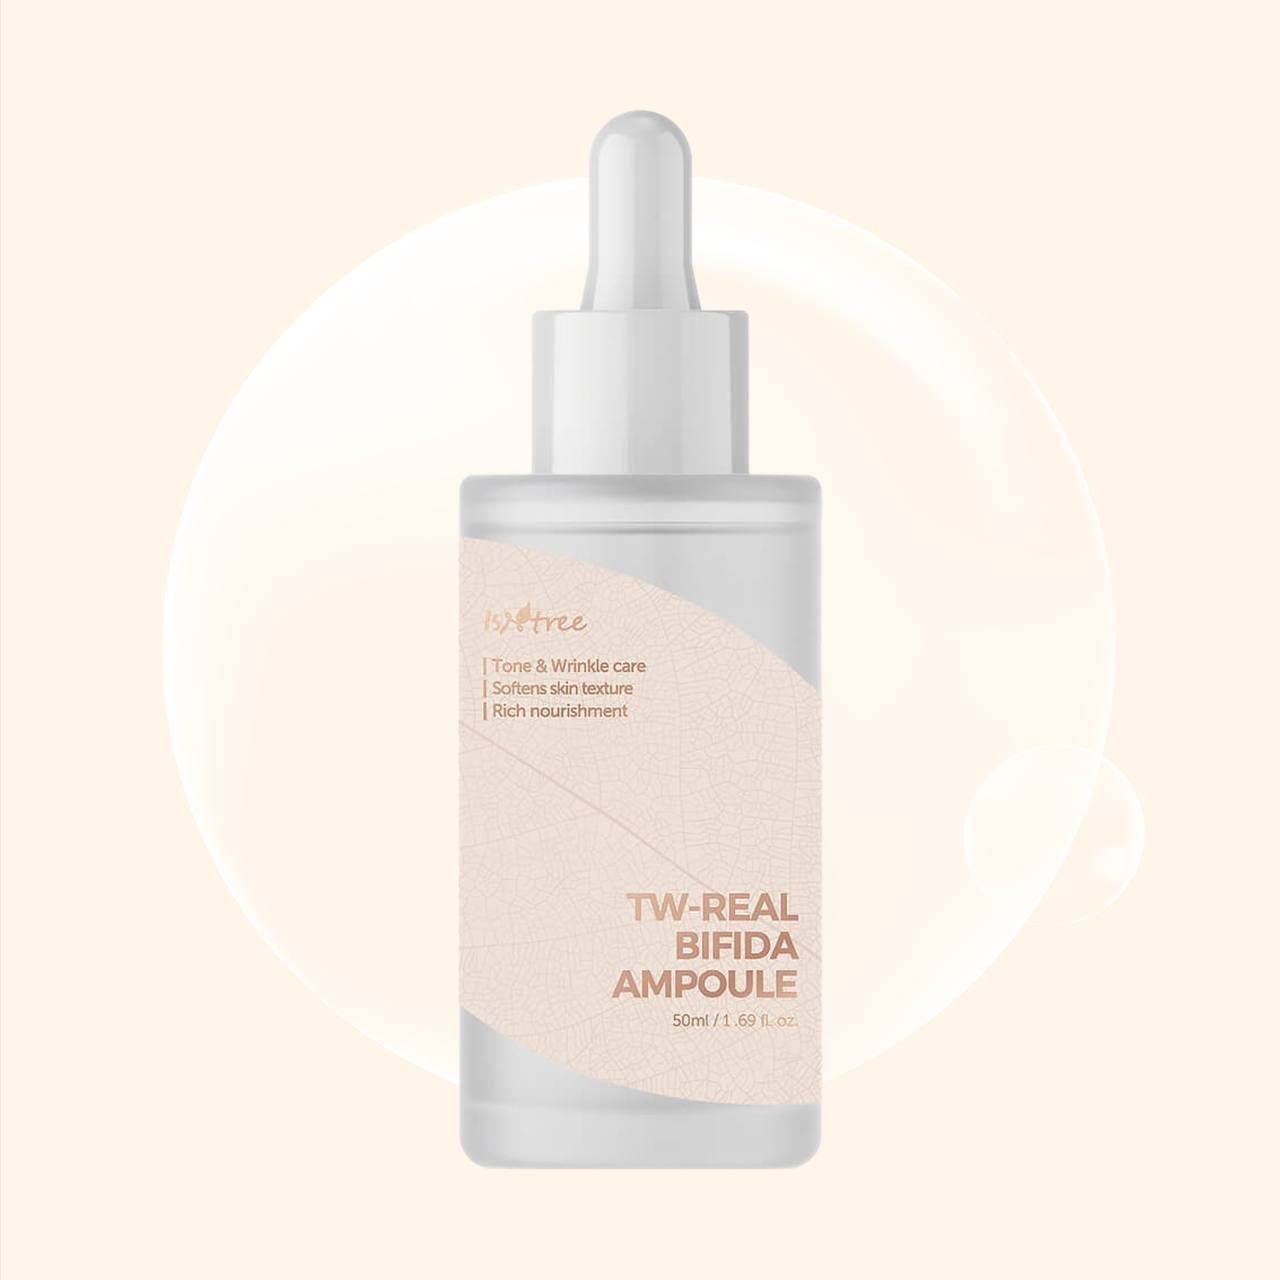 IsNtree TW-REAL Bifida Ampoule 50 мл